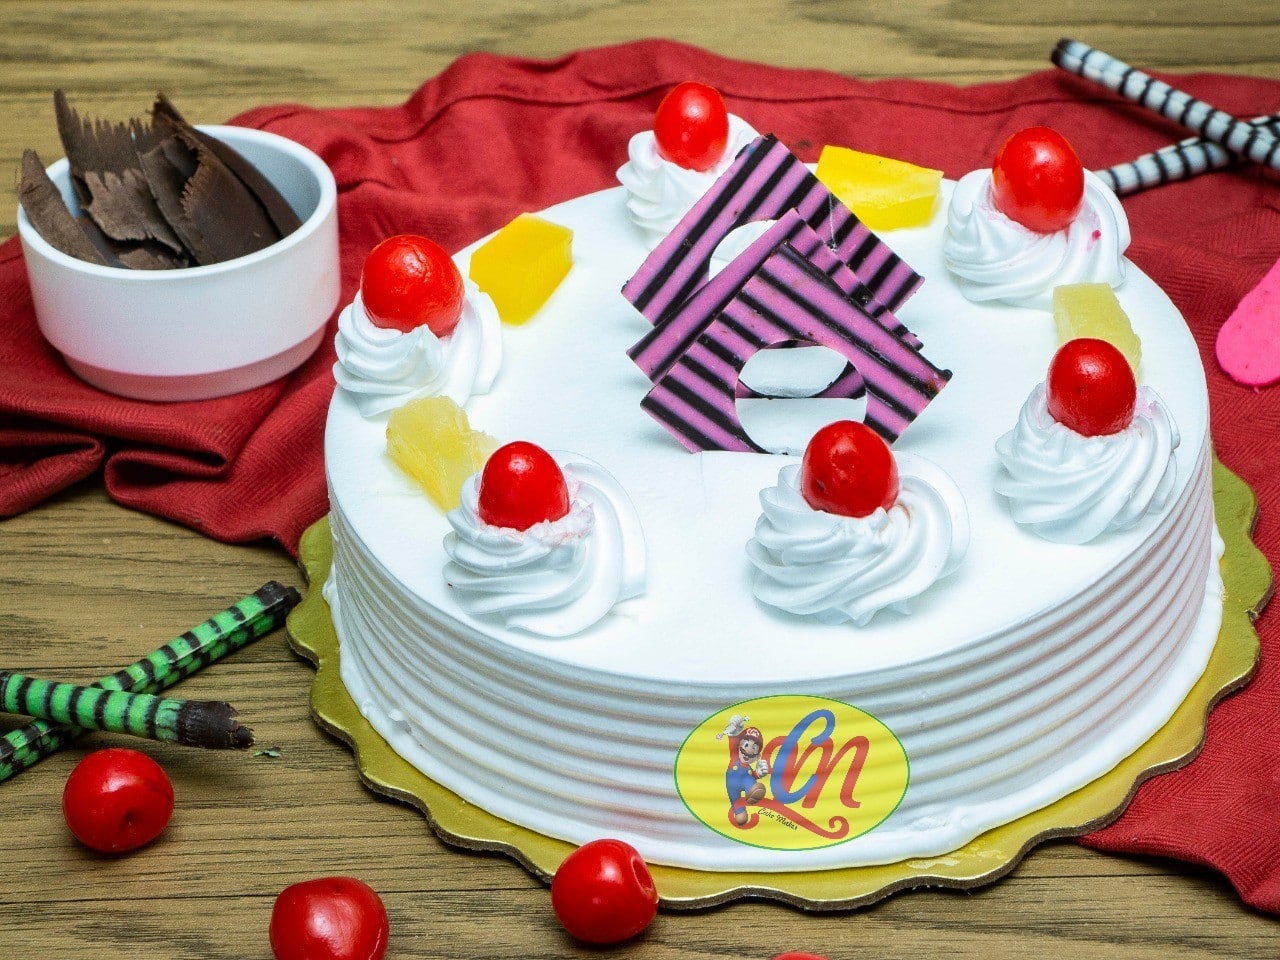 Best Online Cake Delivery in Gurgaon | Order Now - Winni